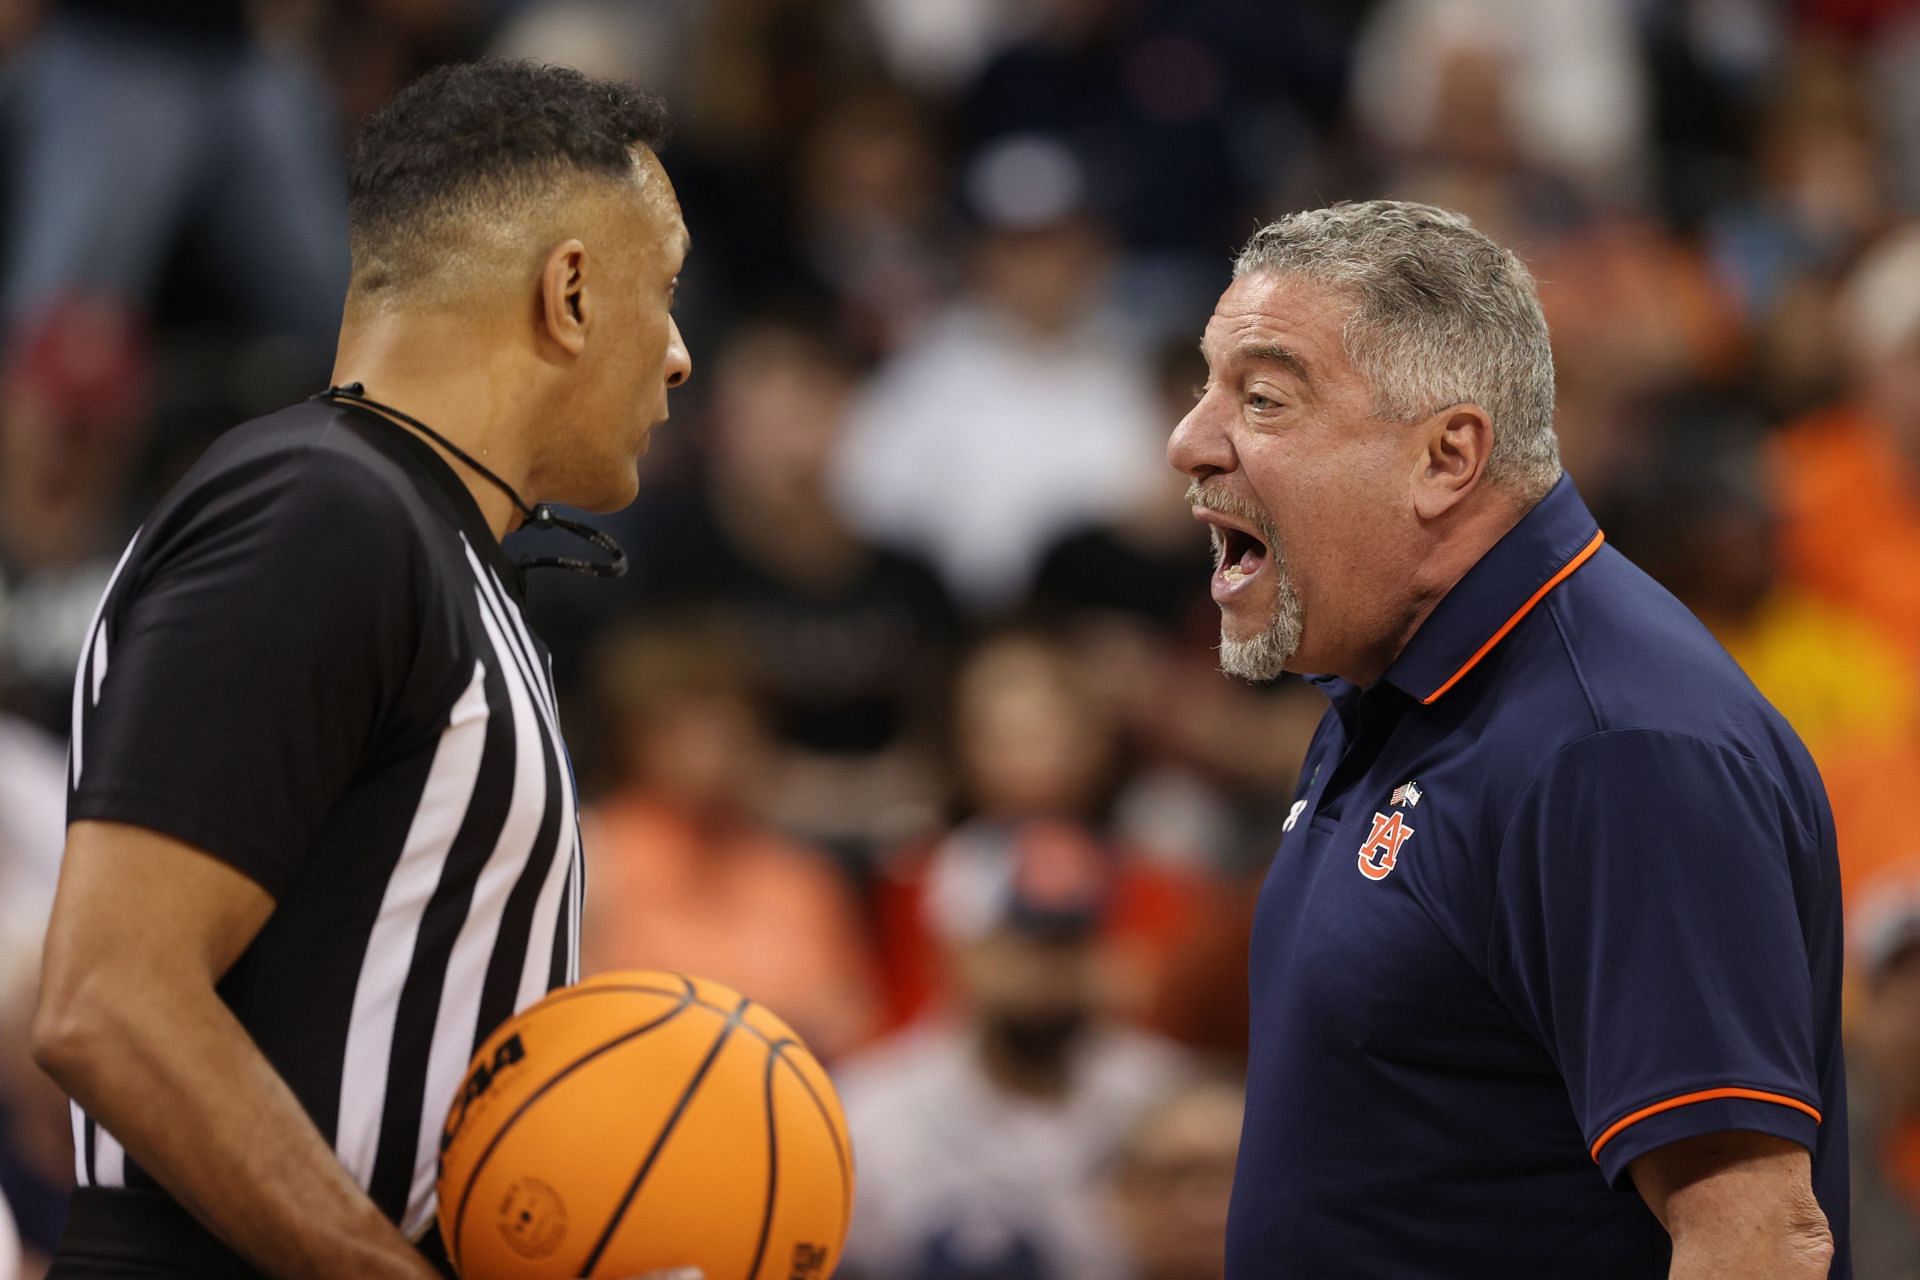 Head coach Bruce Pearl of the Auburn Tigers reacts after the ejection of Chad Baker-Mazara.